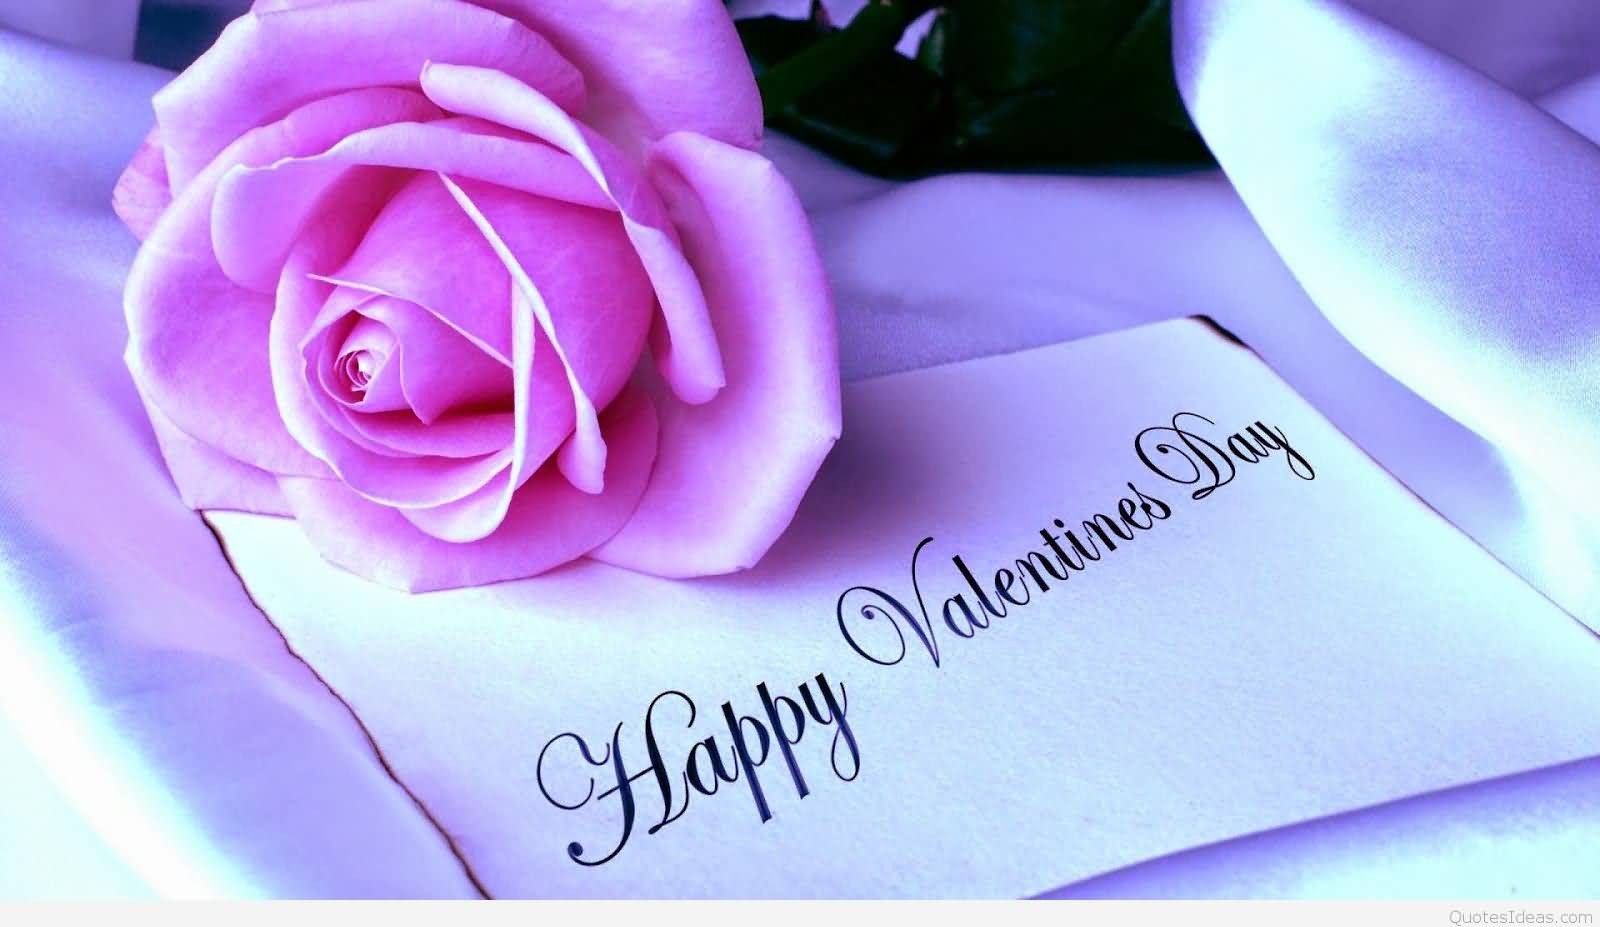 Happy Valentine’s Day Note With Pink Rose Greeting Card